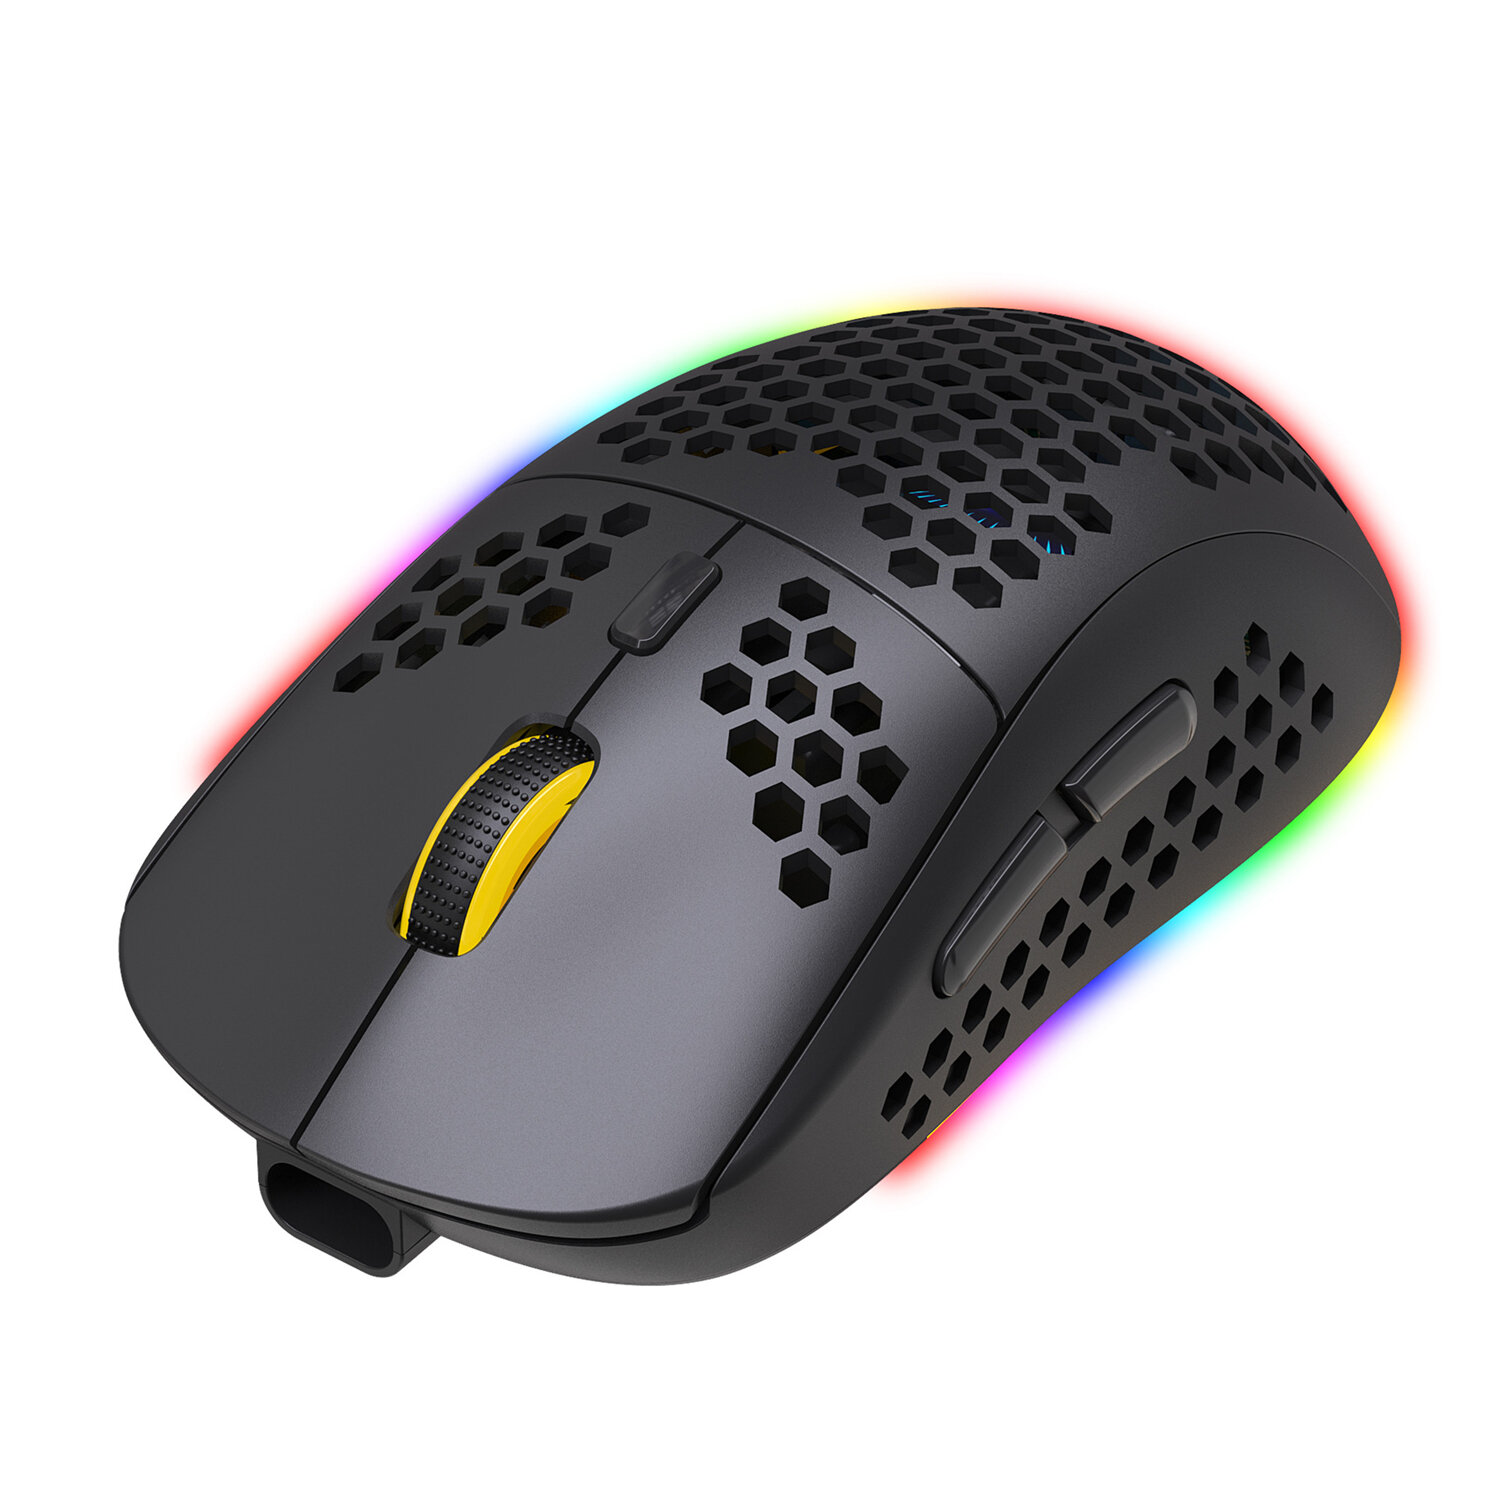 HXSJ T90 Wireless Mouse Three Mode bluetooth 3.0+bluetooth 5.0+2.4G Wireless Mouse Built-In Batteries Type-C Interface R